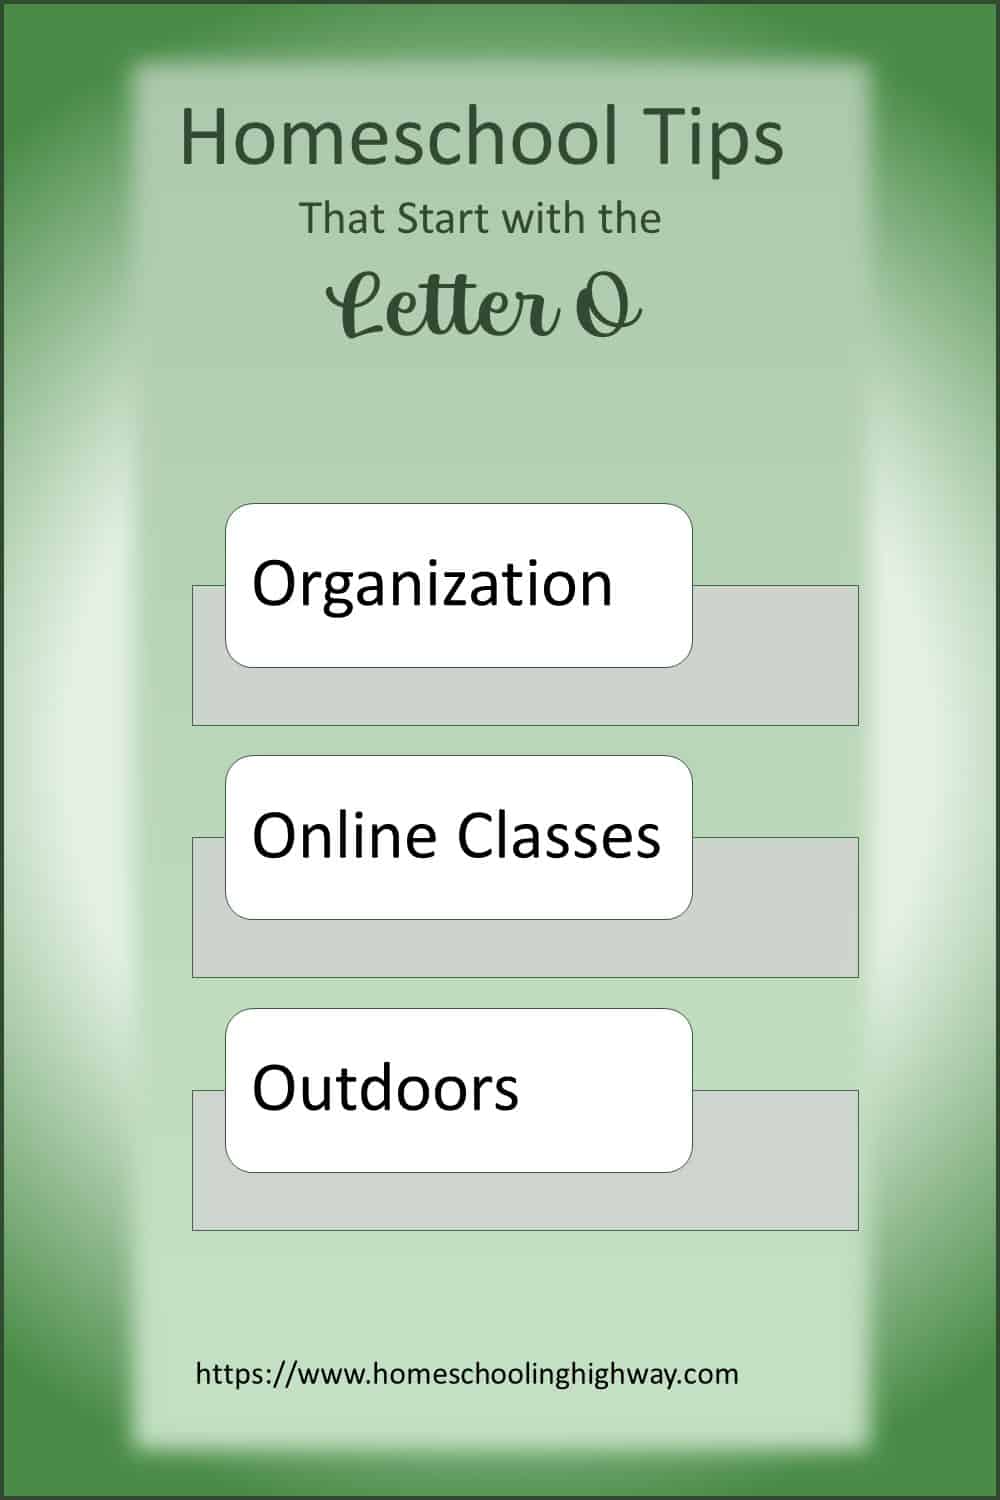 Homeschooling Tips That Start With O. Organization, Online Classes, Outdoors